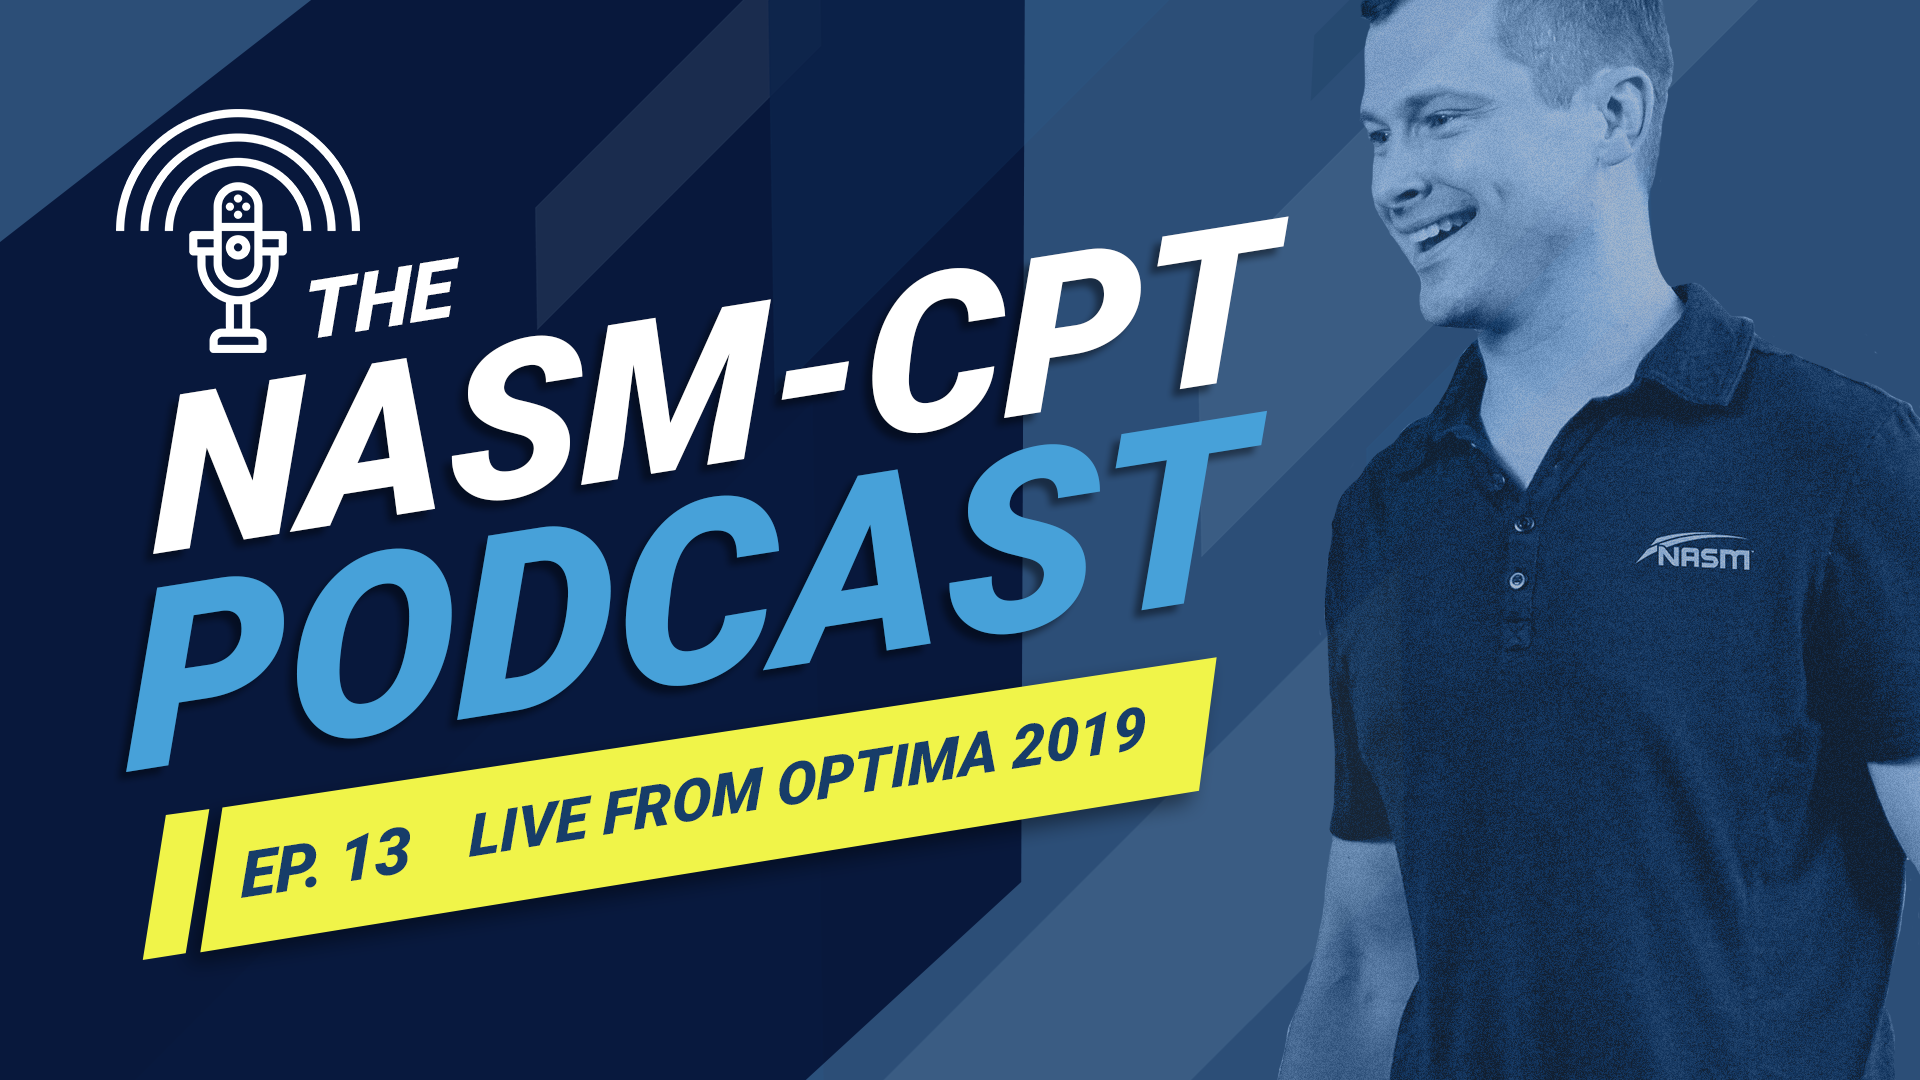 The Sportstraining-Weightloss-CPT Podcast: Live from Optima 2019 Conference